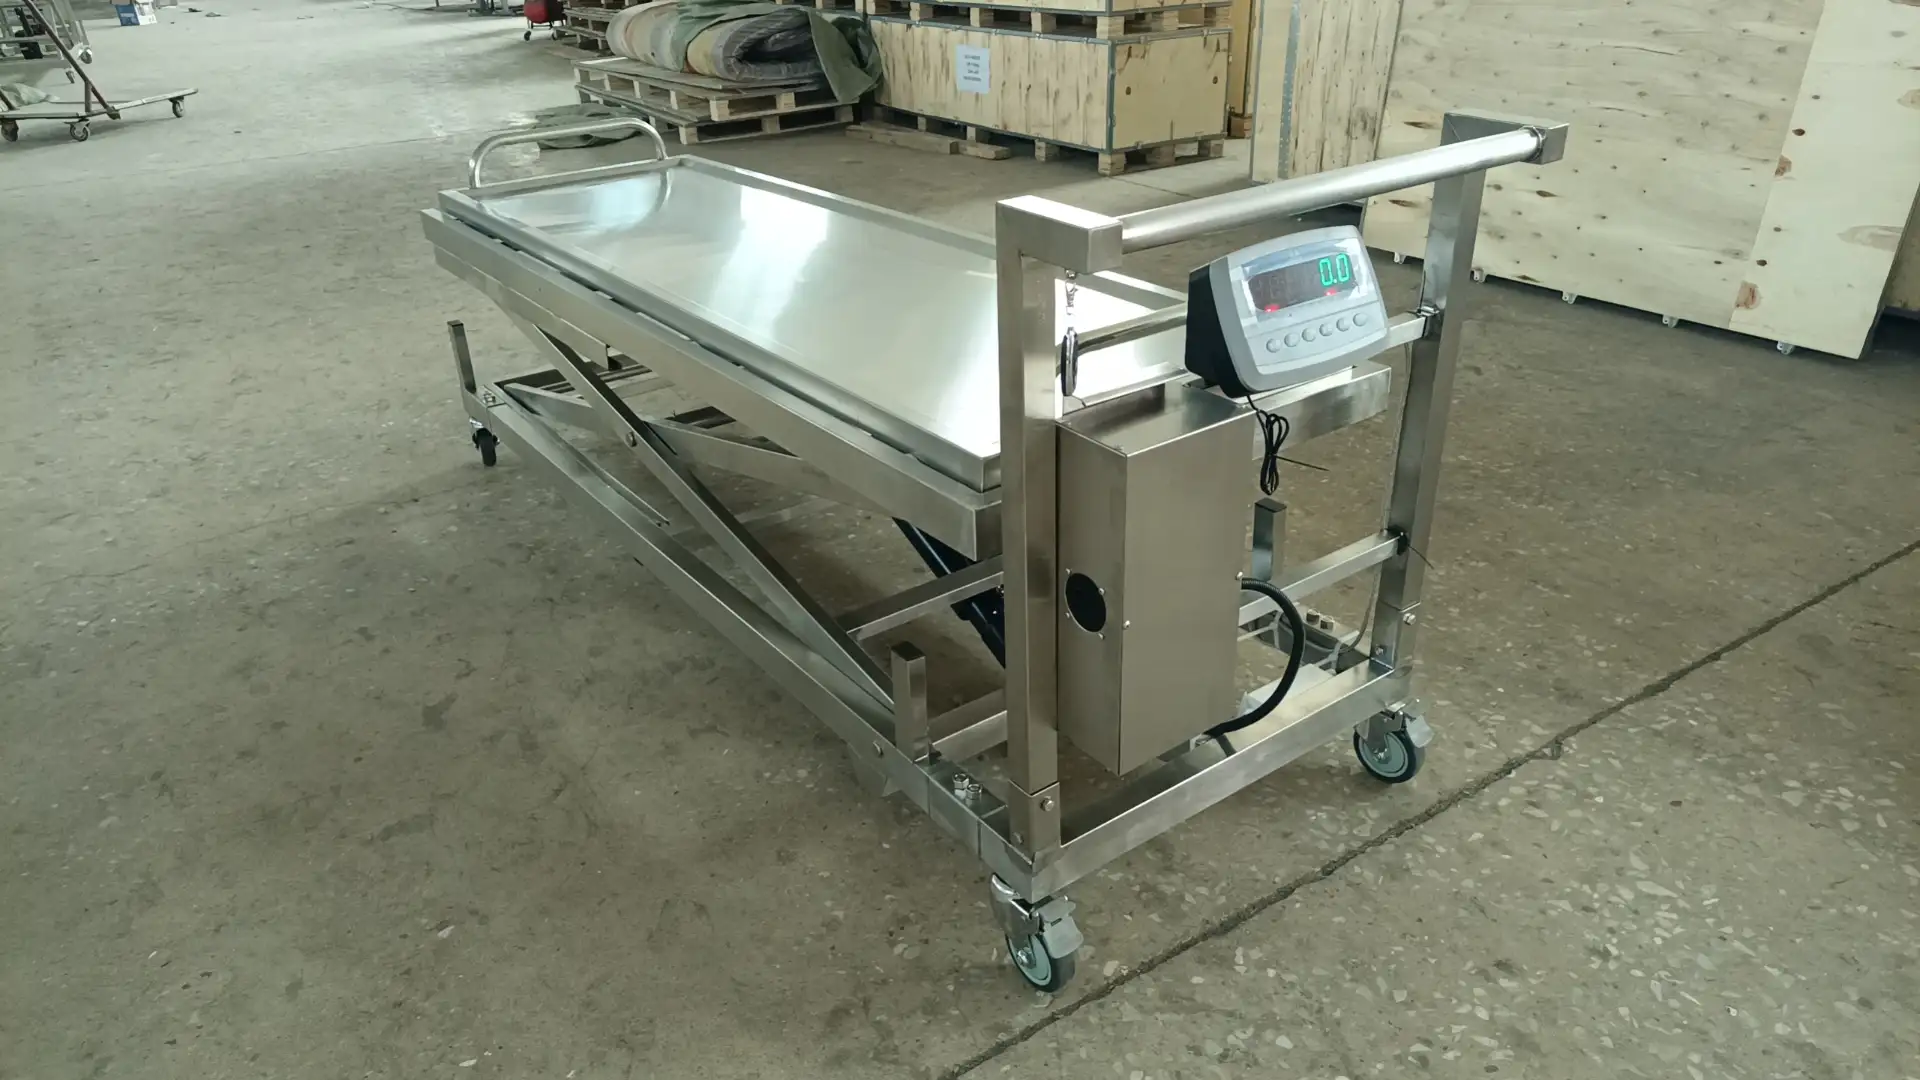 Introducing Our Innovative Product: Mortuary Lift with Built-In Weighing Capability